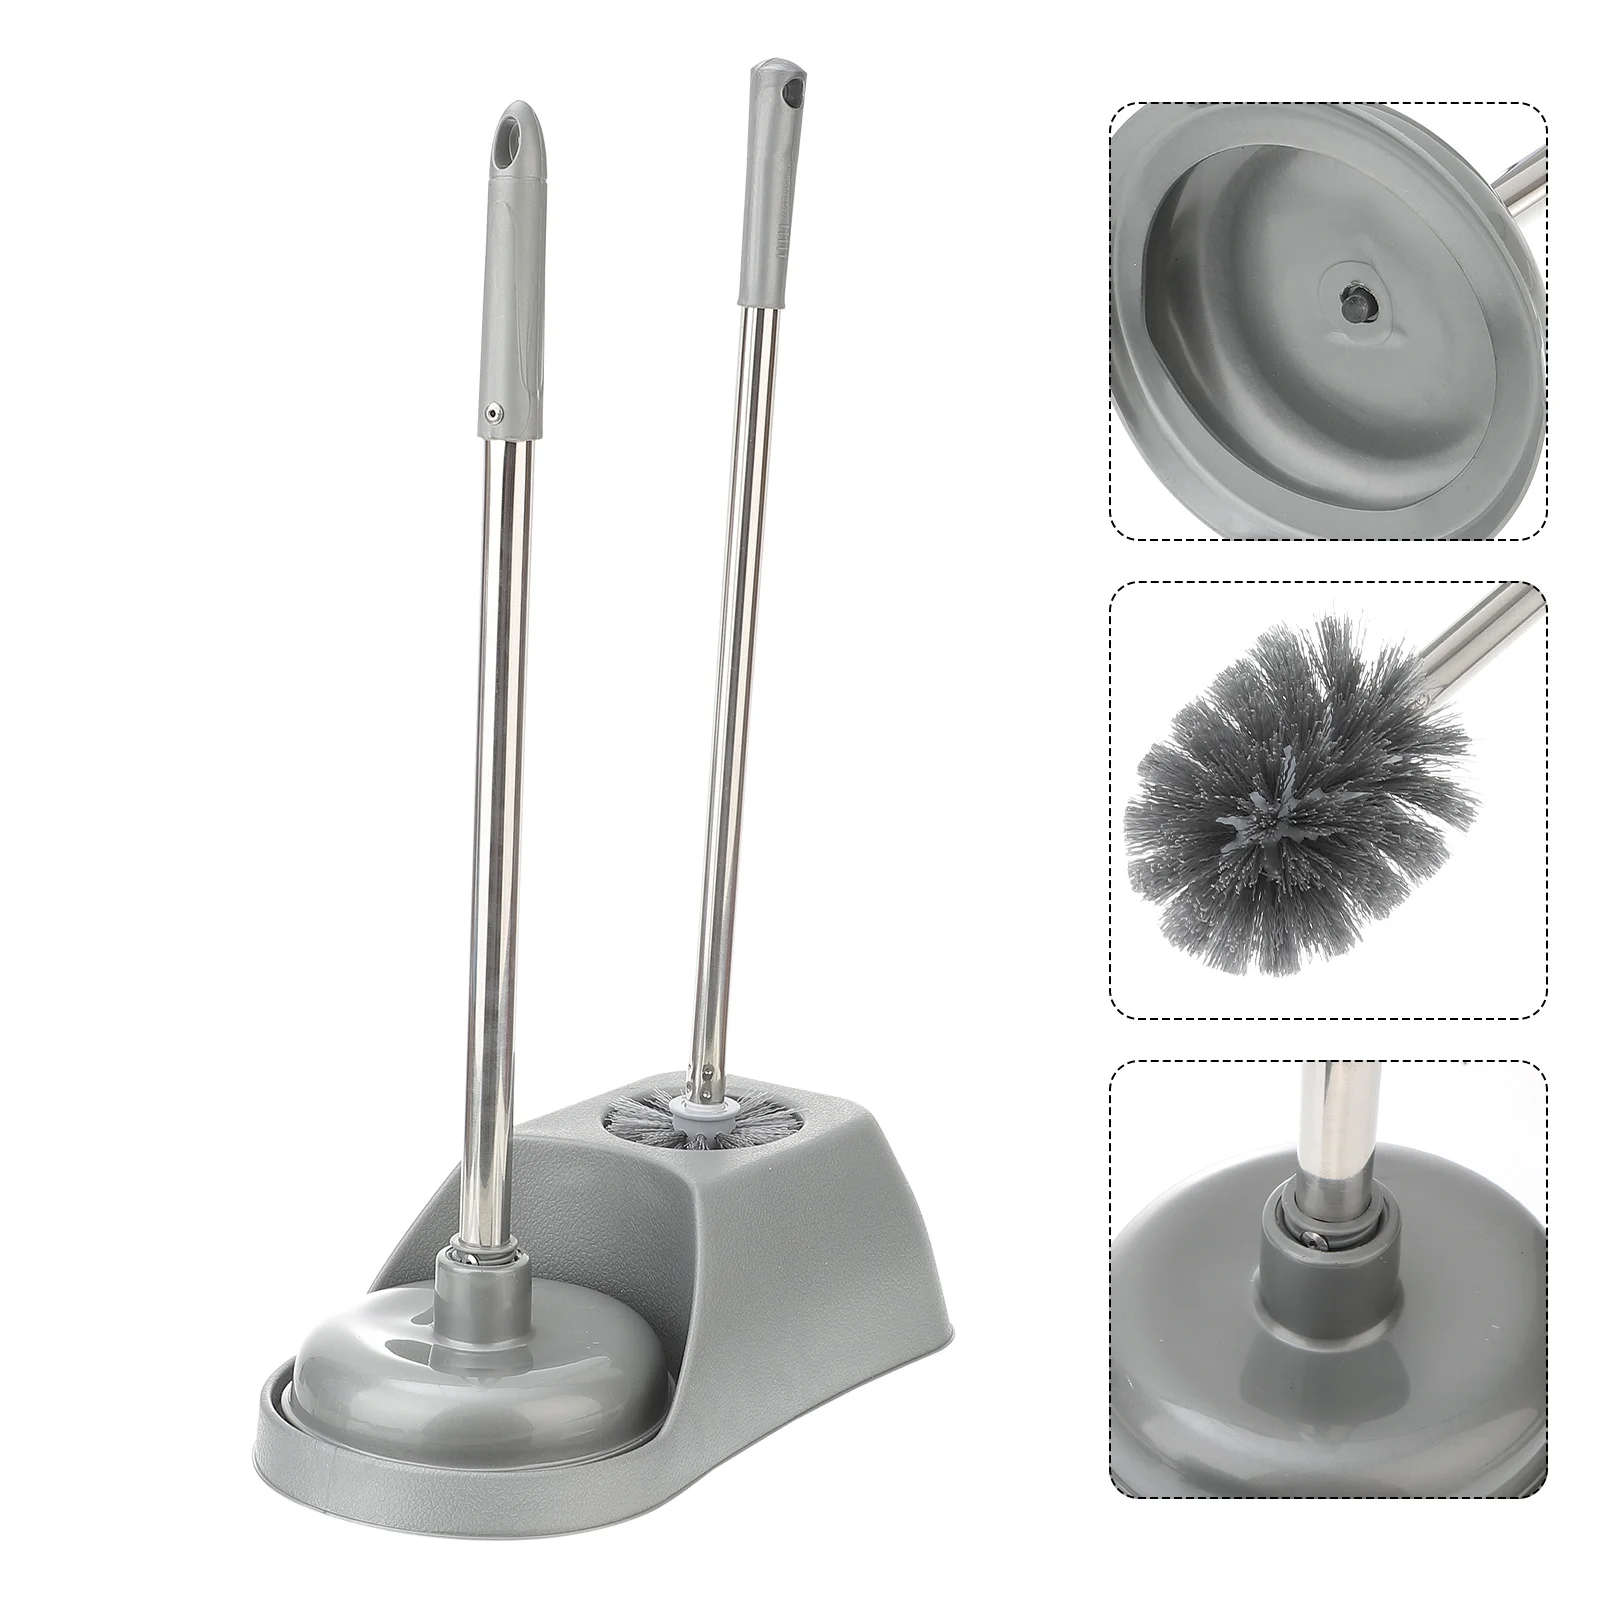 

Toilet Brush Bathroom Decor Accessories Long Handle Powerful Plunger Plastic Cleaning with Holder